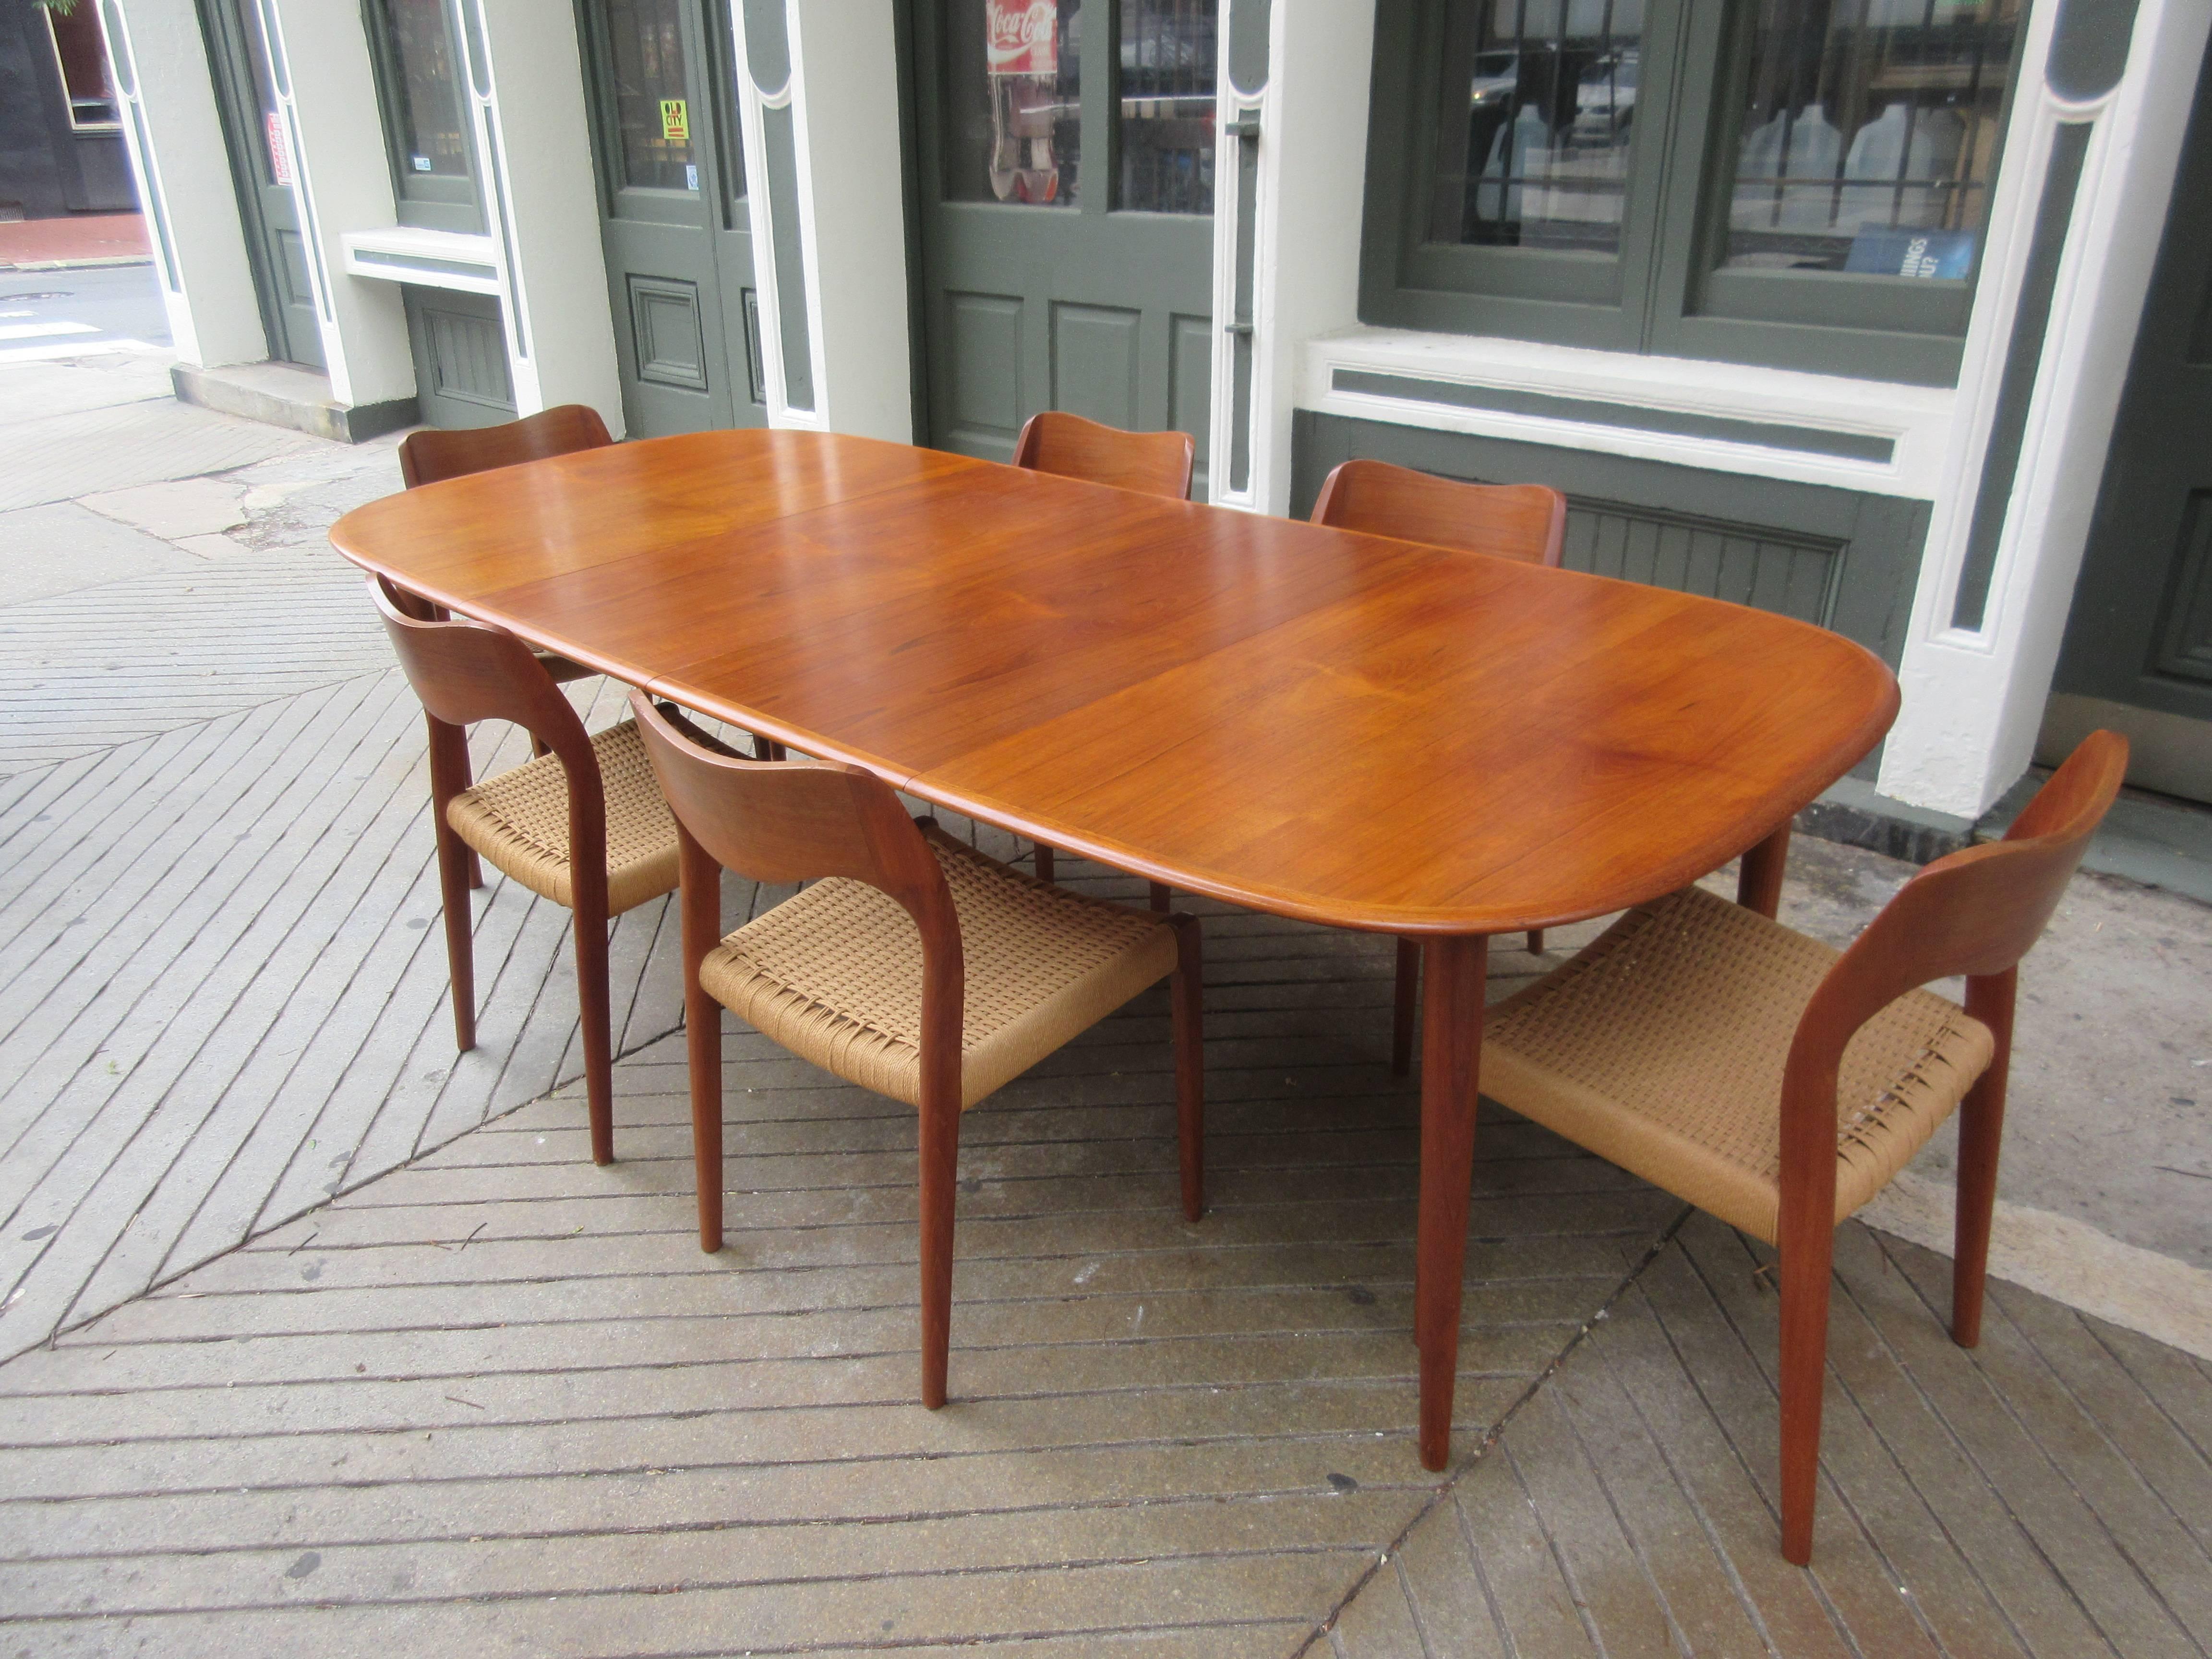 Neils Moeller Chairs Paired with MM Moreddi Teak Dining Table 5